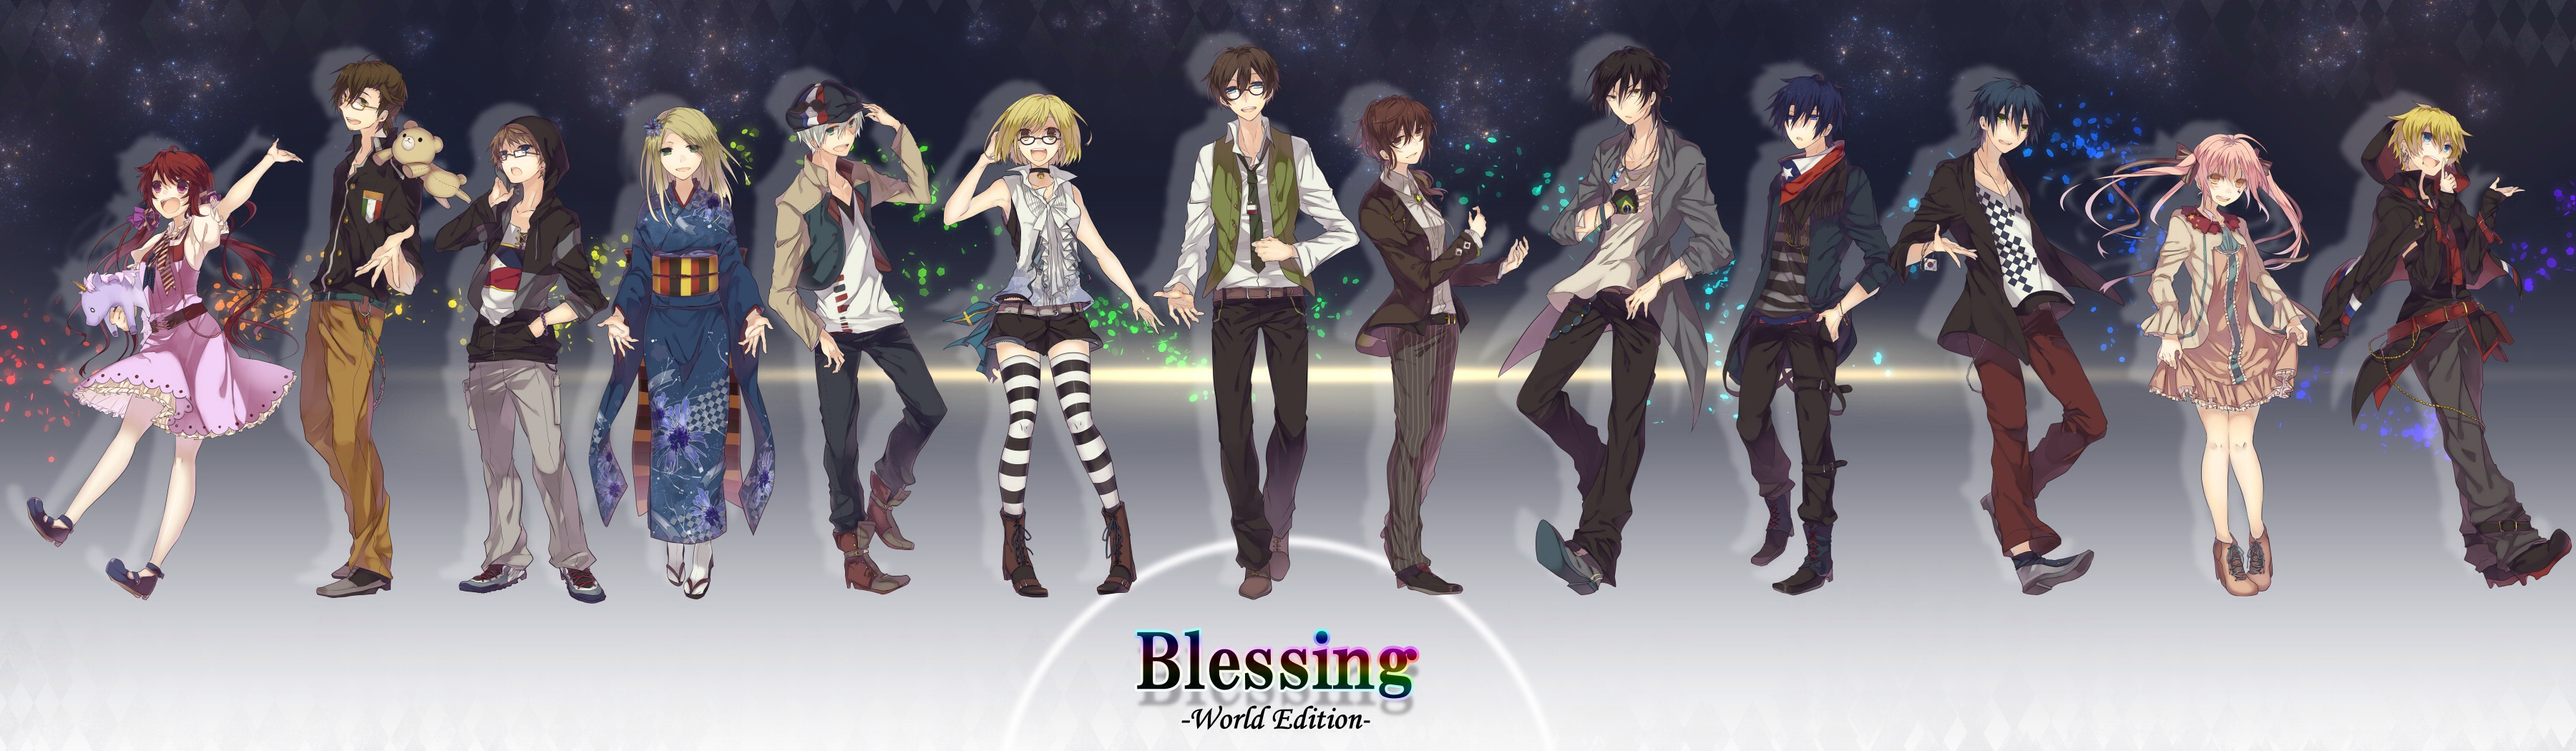 Blessing.worldedition.1754430.png